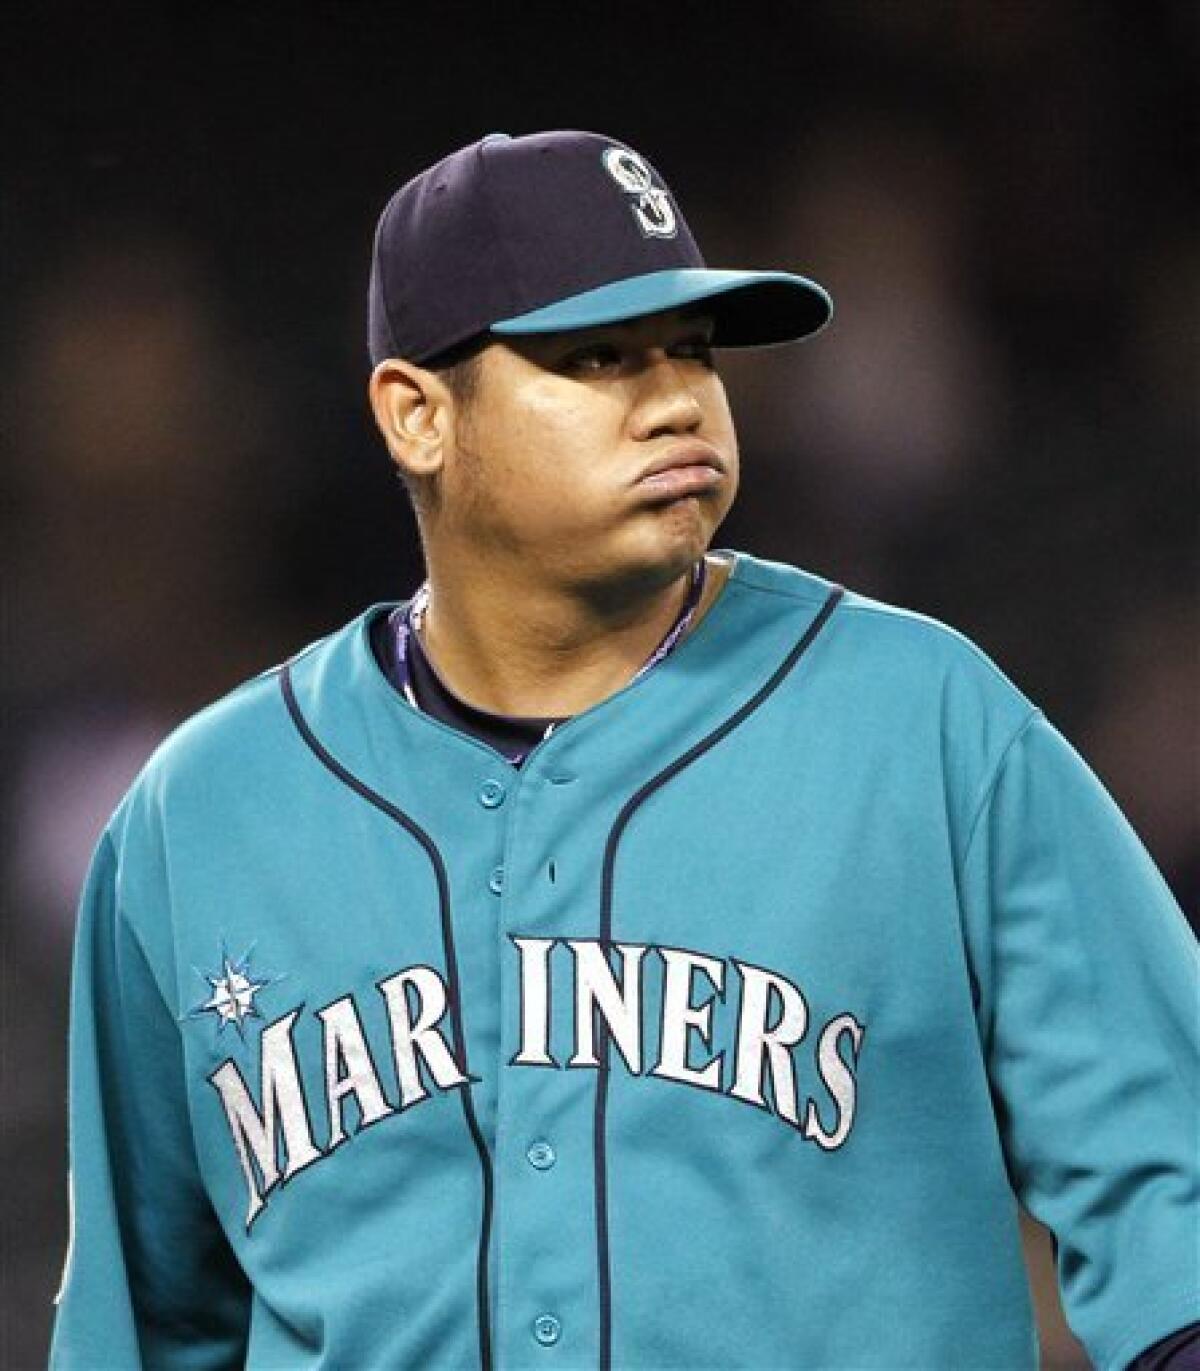 Felix Hernandez photos: See stunning images of last game for Mariners